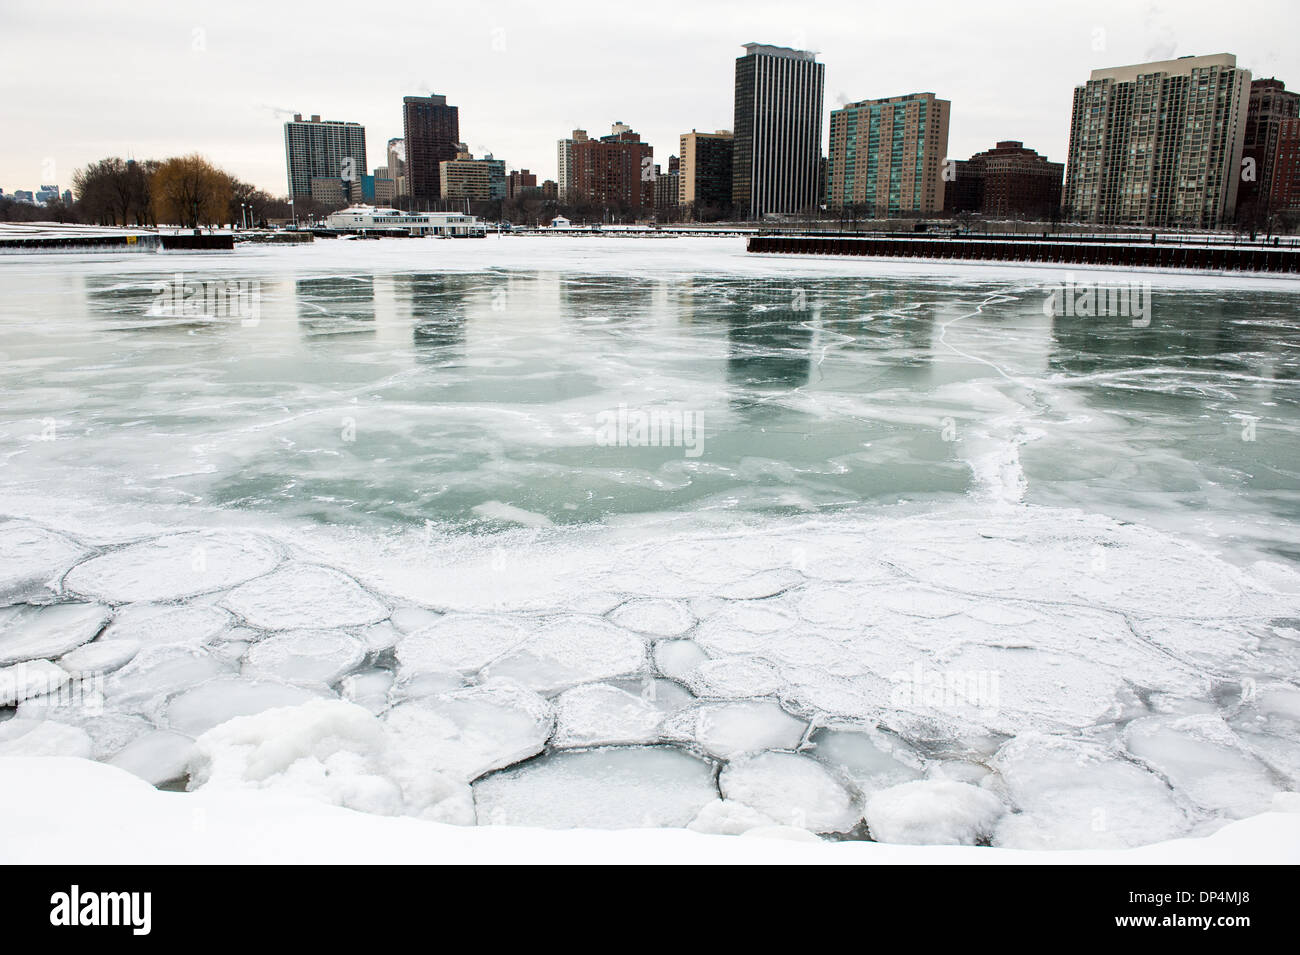 A view of a frozen over Belmont Harbor in Chicago. Photo credit: Max Herman Stock Photo